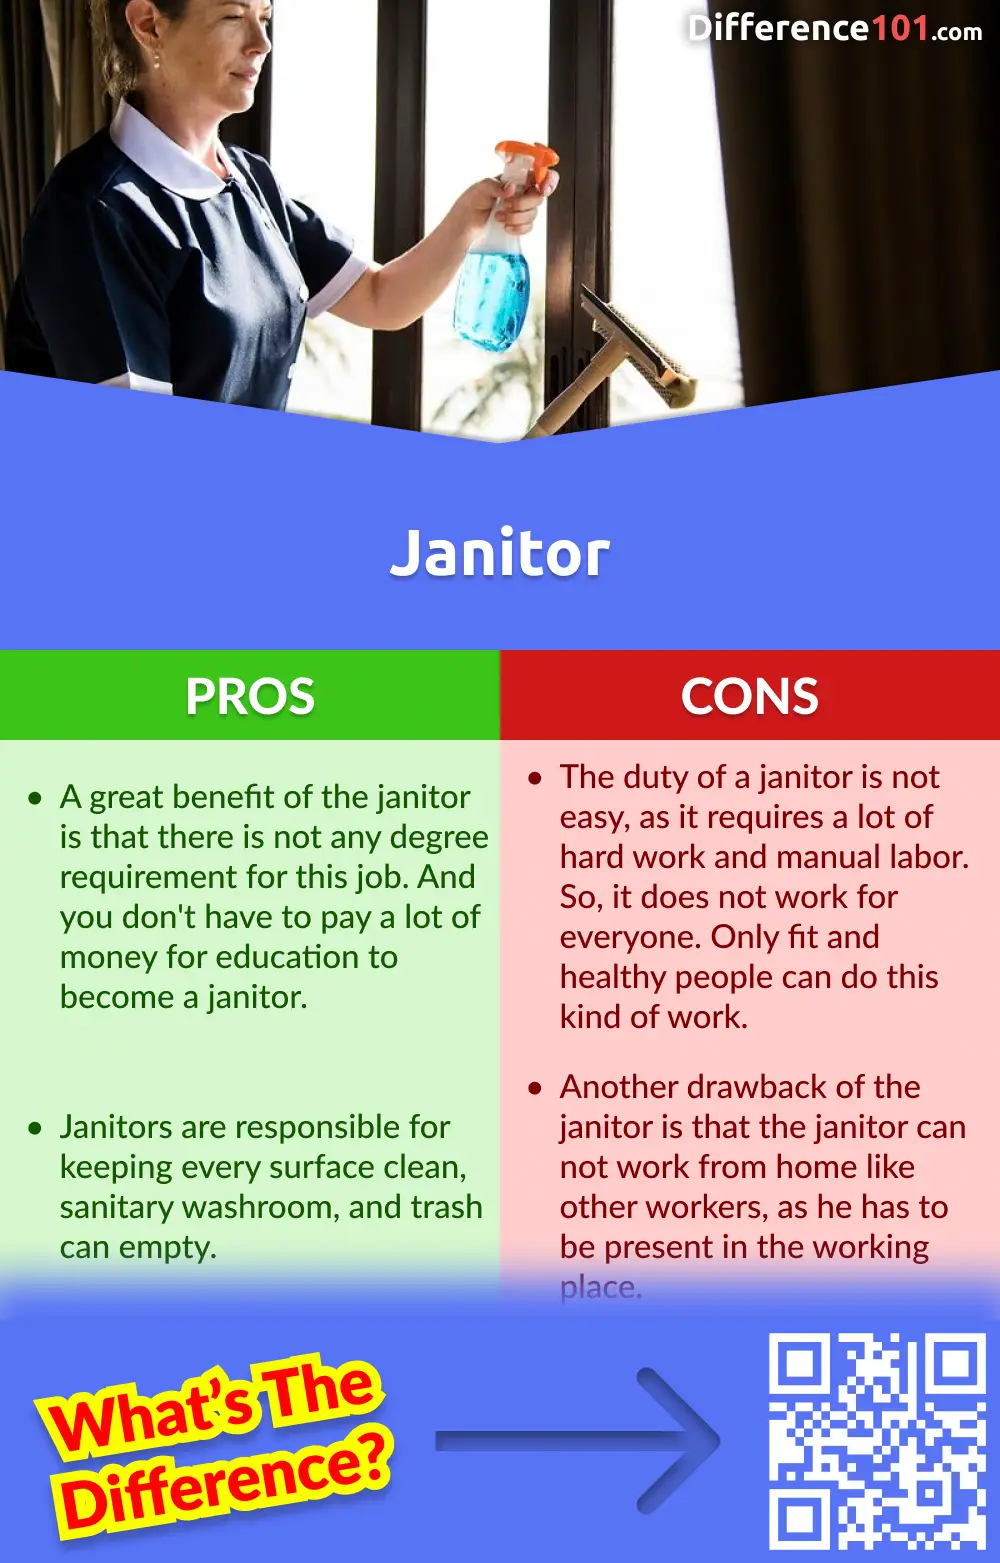 Janitor Pros and Cons
